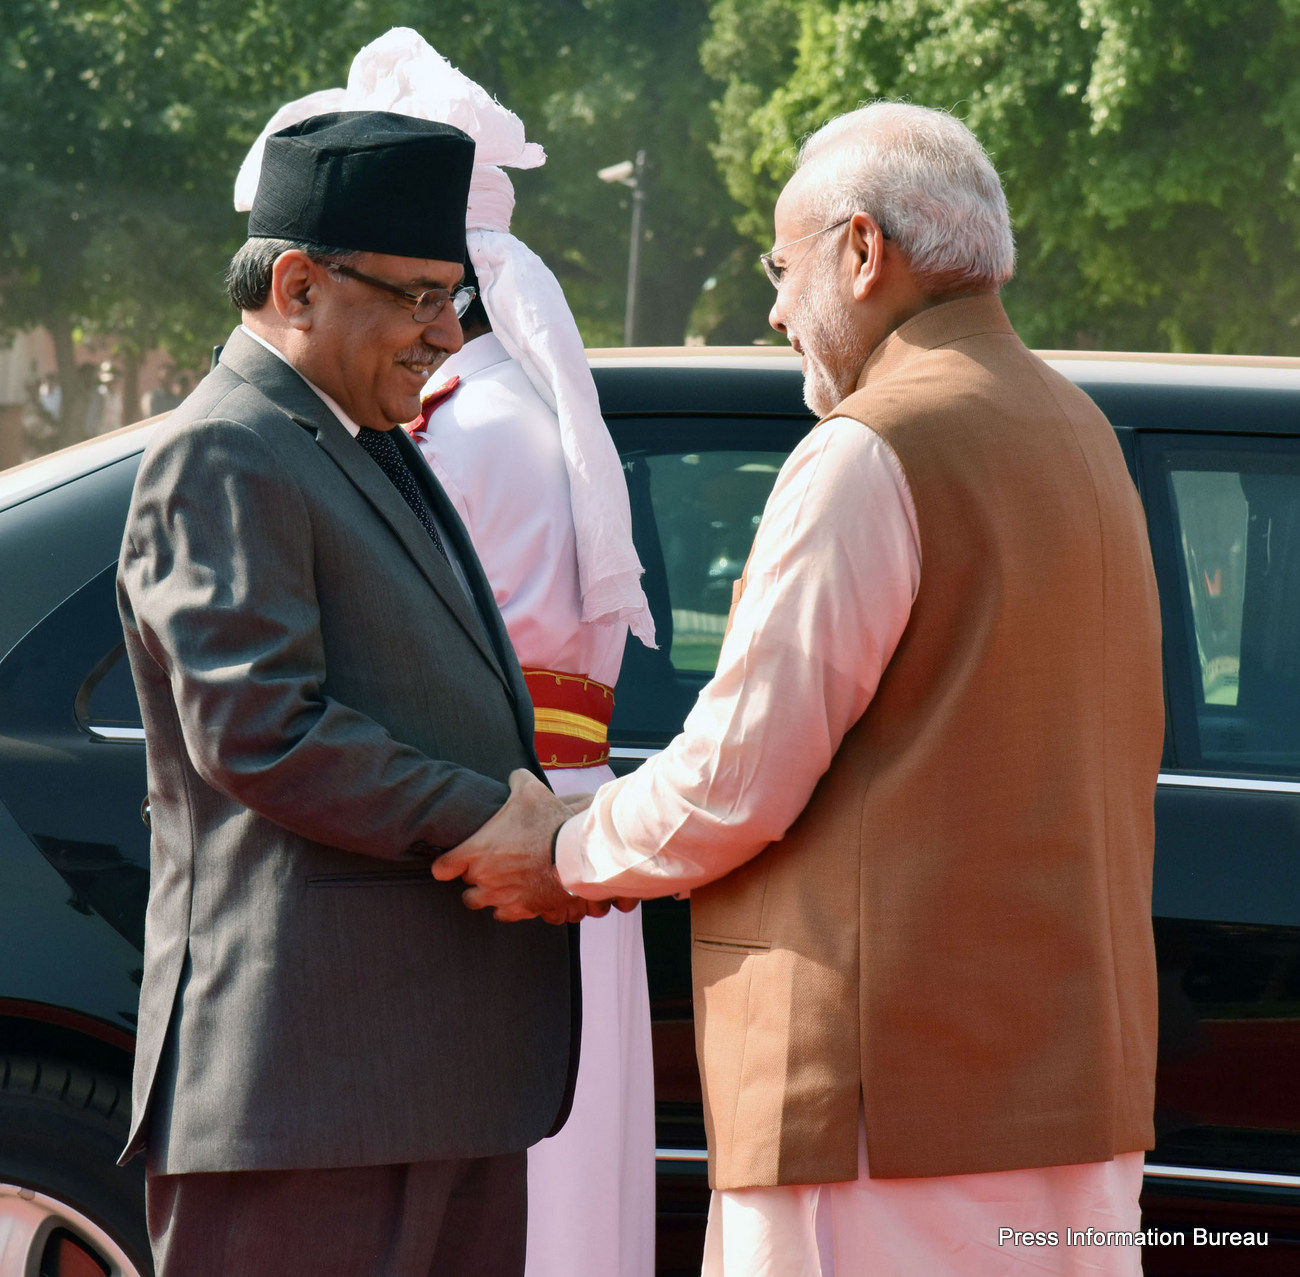 The Prime Minister of Nepal, Mr. Pushpa Kamal Dahal being received by the Prime Minister, Shri Narendra Modi, at the Ceremonial Reception, at Rashtrapati Bhavan, in New Delhi on September 16, 2016.